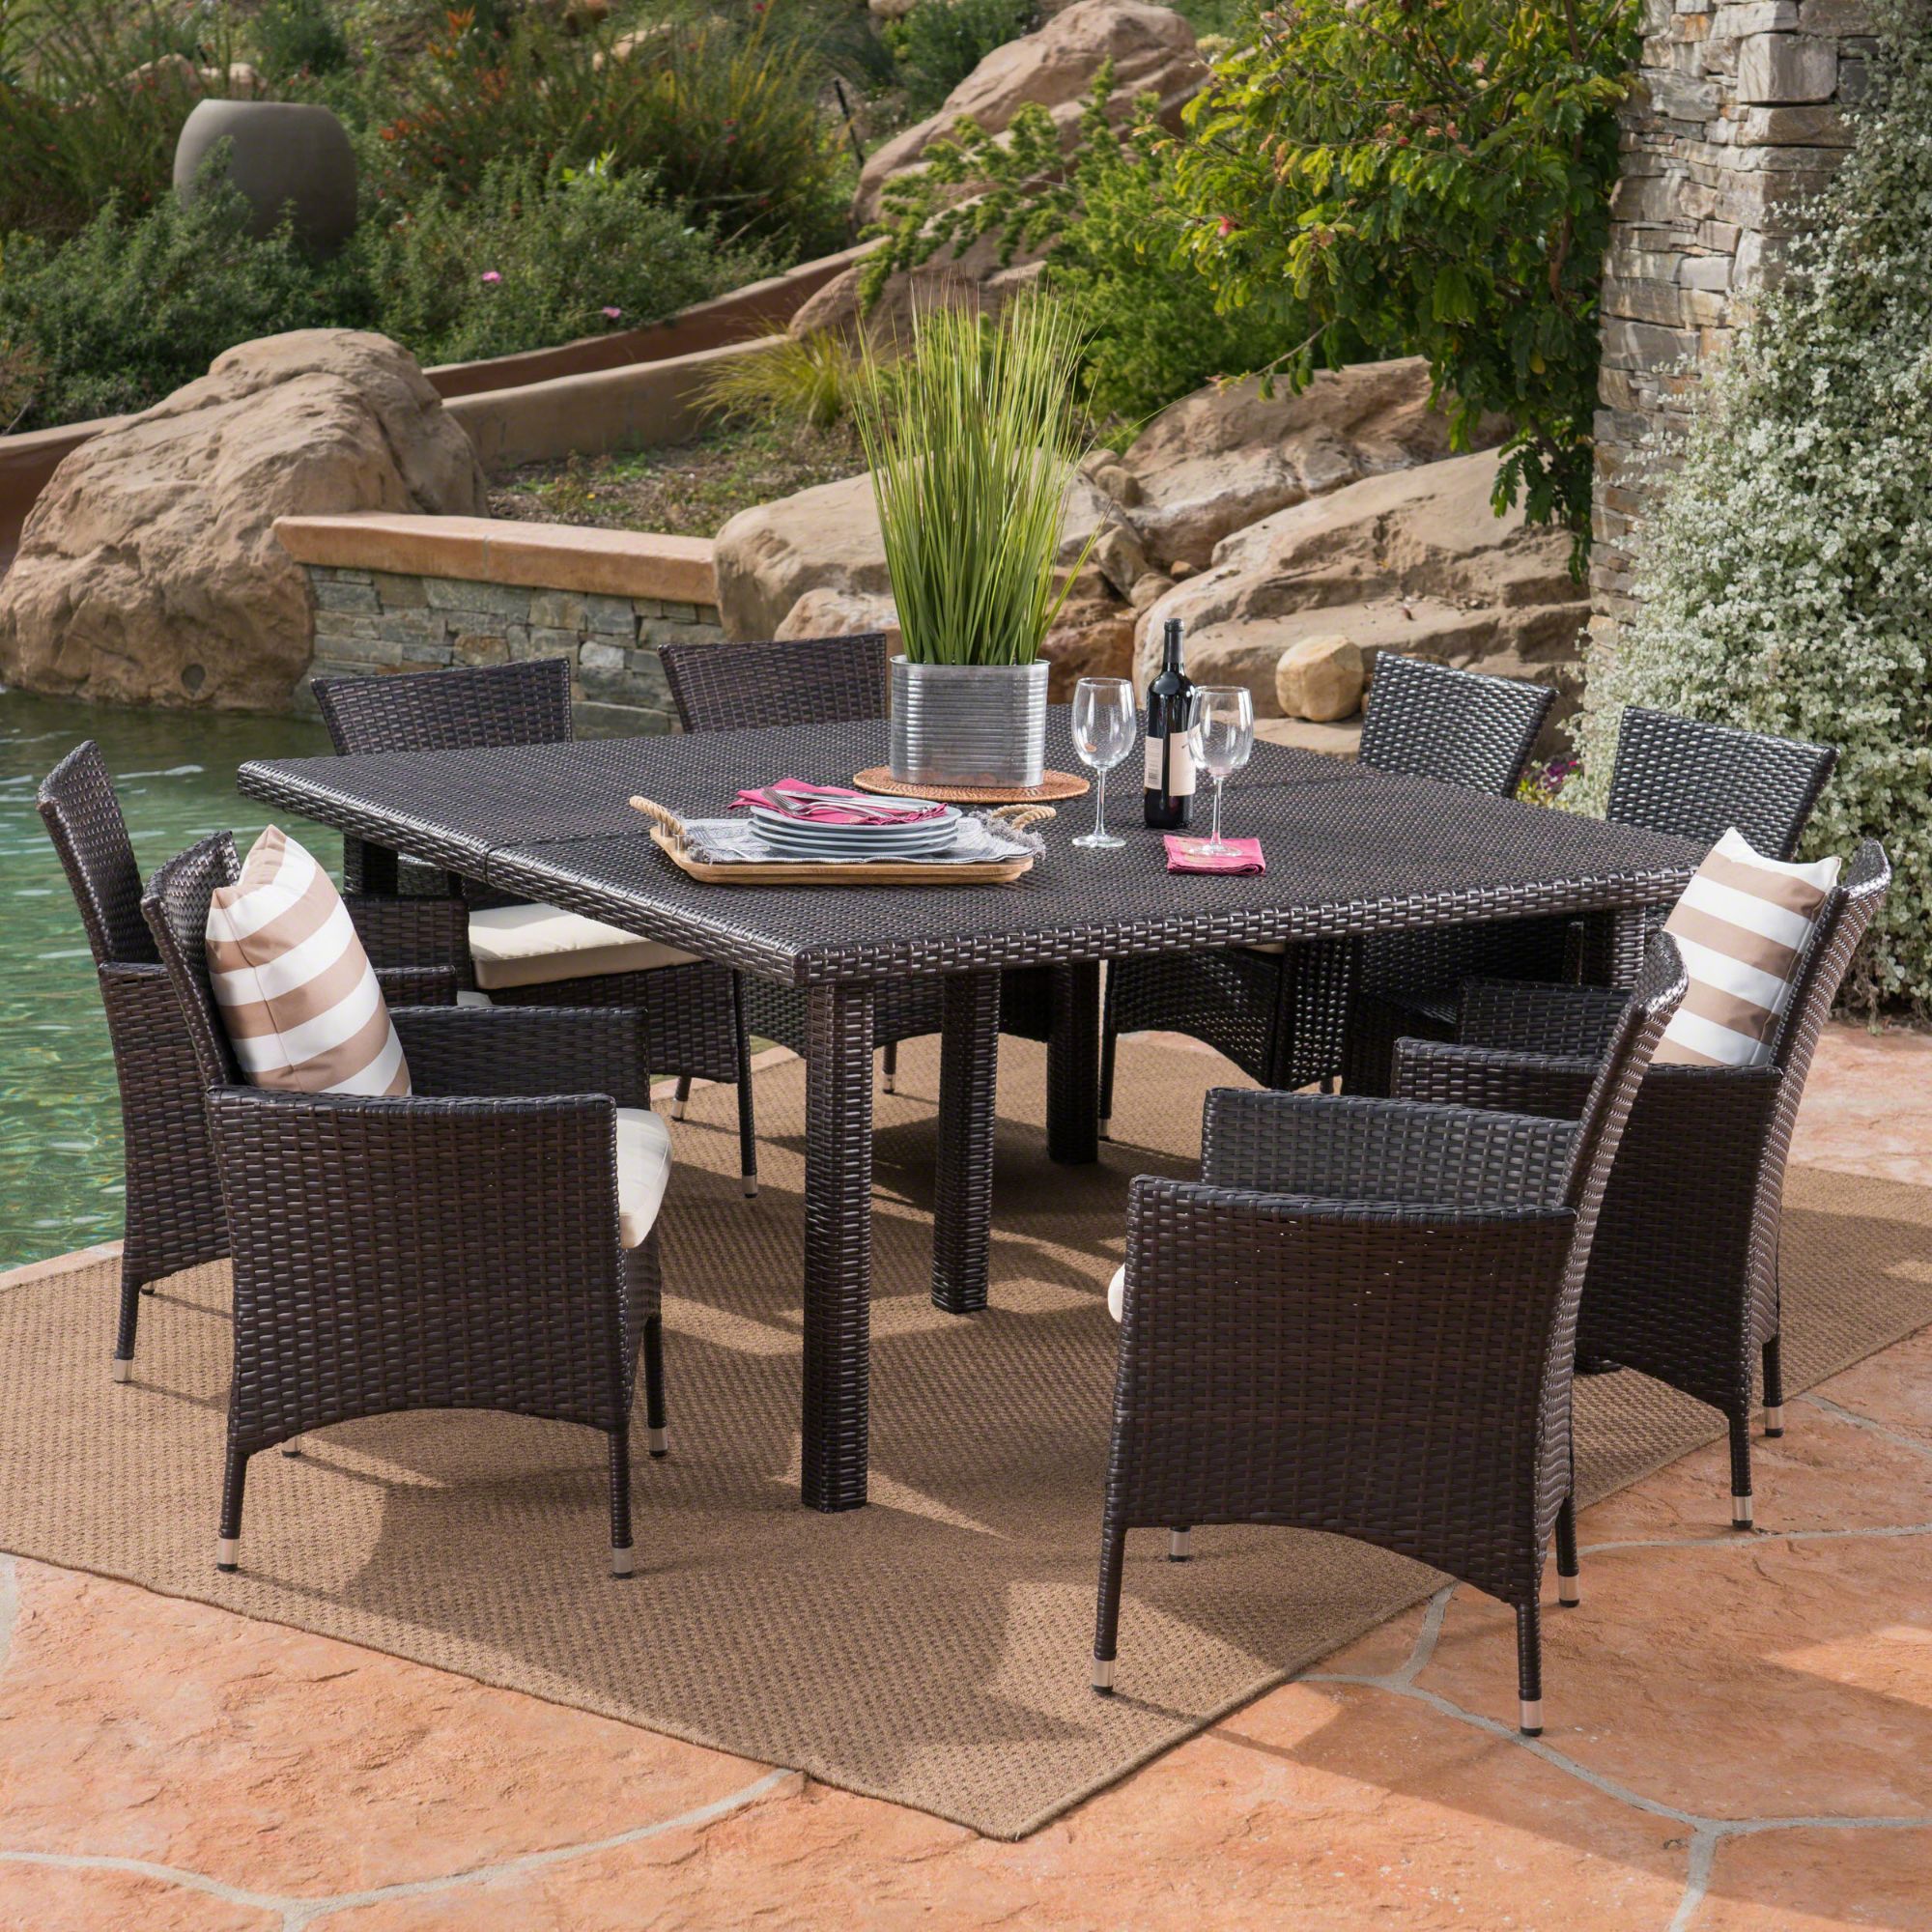 9 Piece Brown Finish Square Wicker Outdoor Furniture Patio Dining Set Throughout 9 Piece Outdoor Square Dining Sets (View 1 of 15)